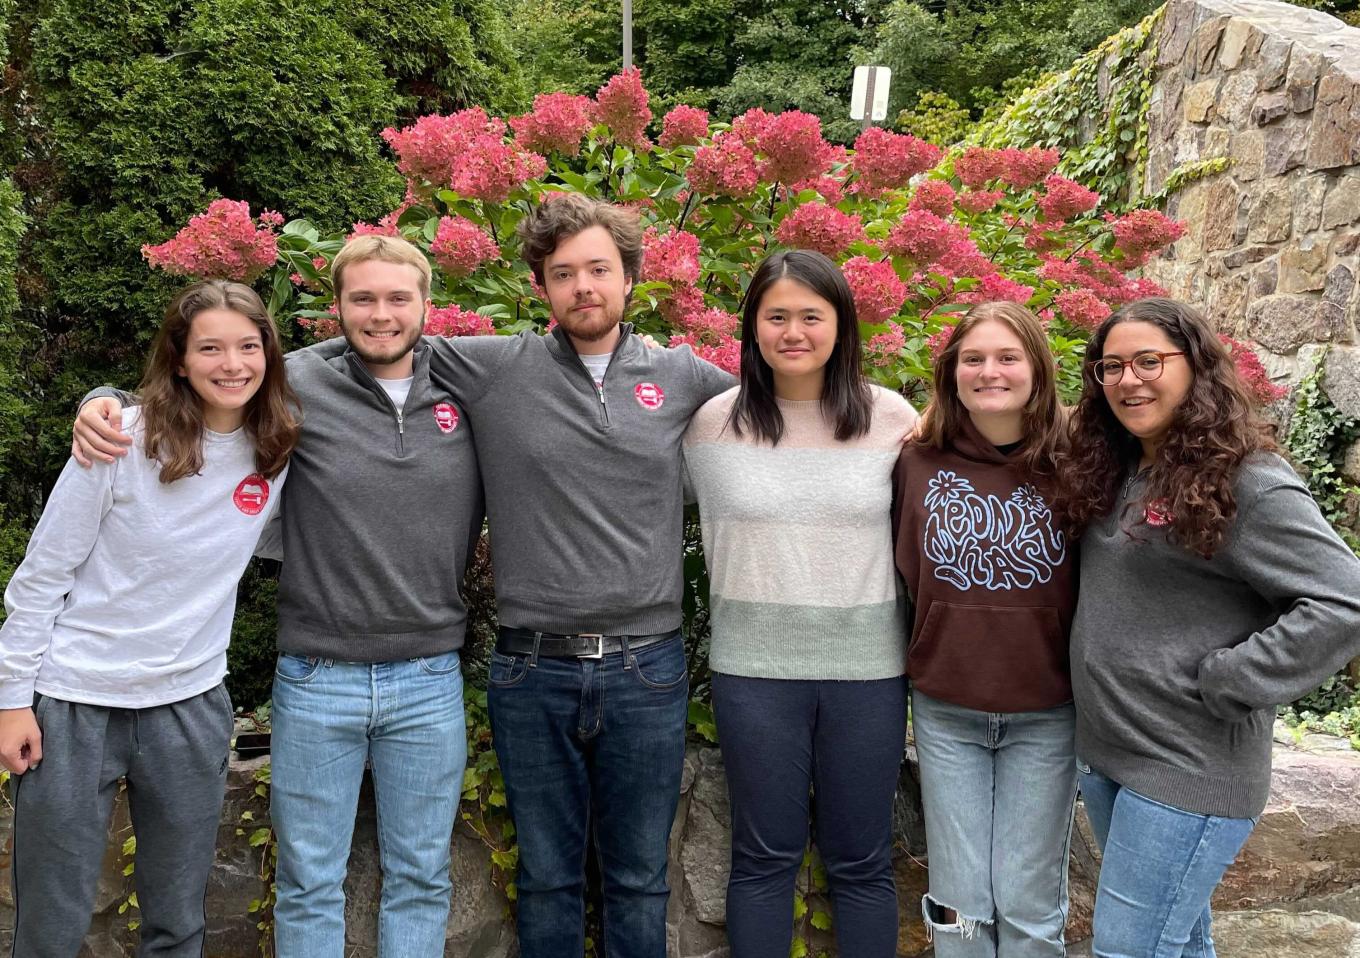 Six Cornell students pose together outside